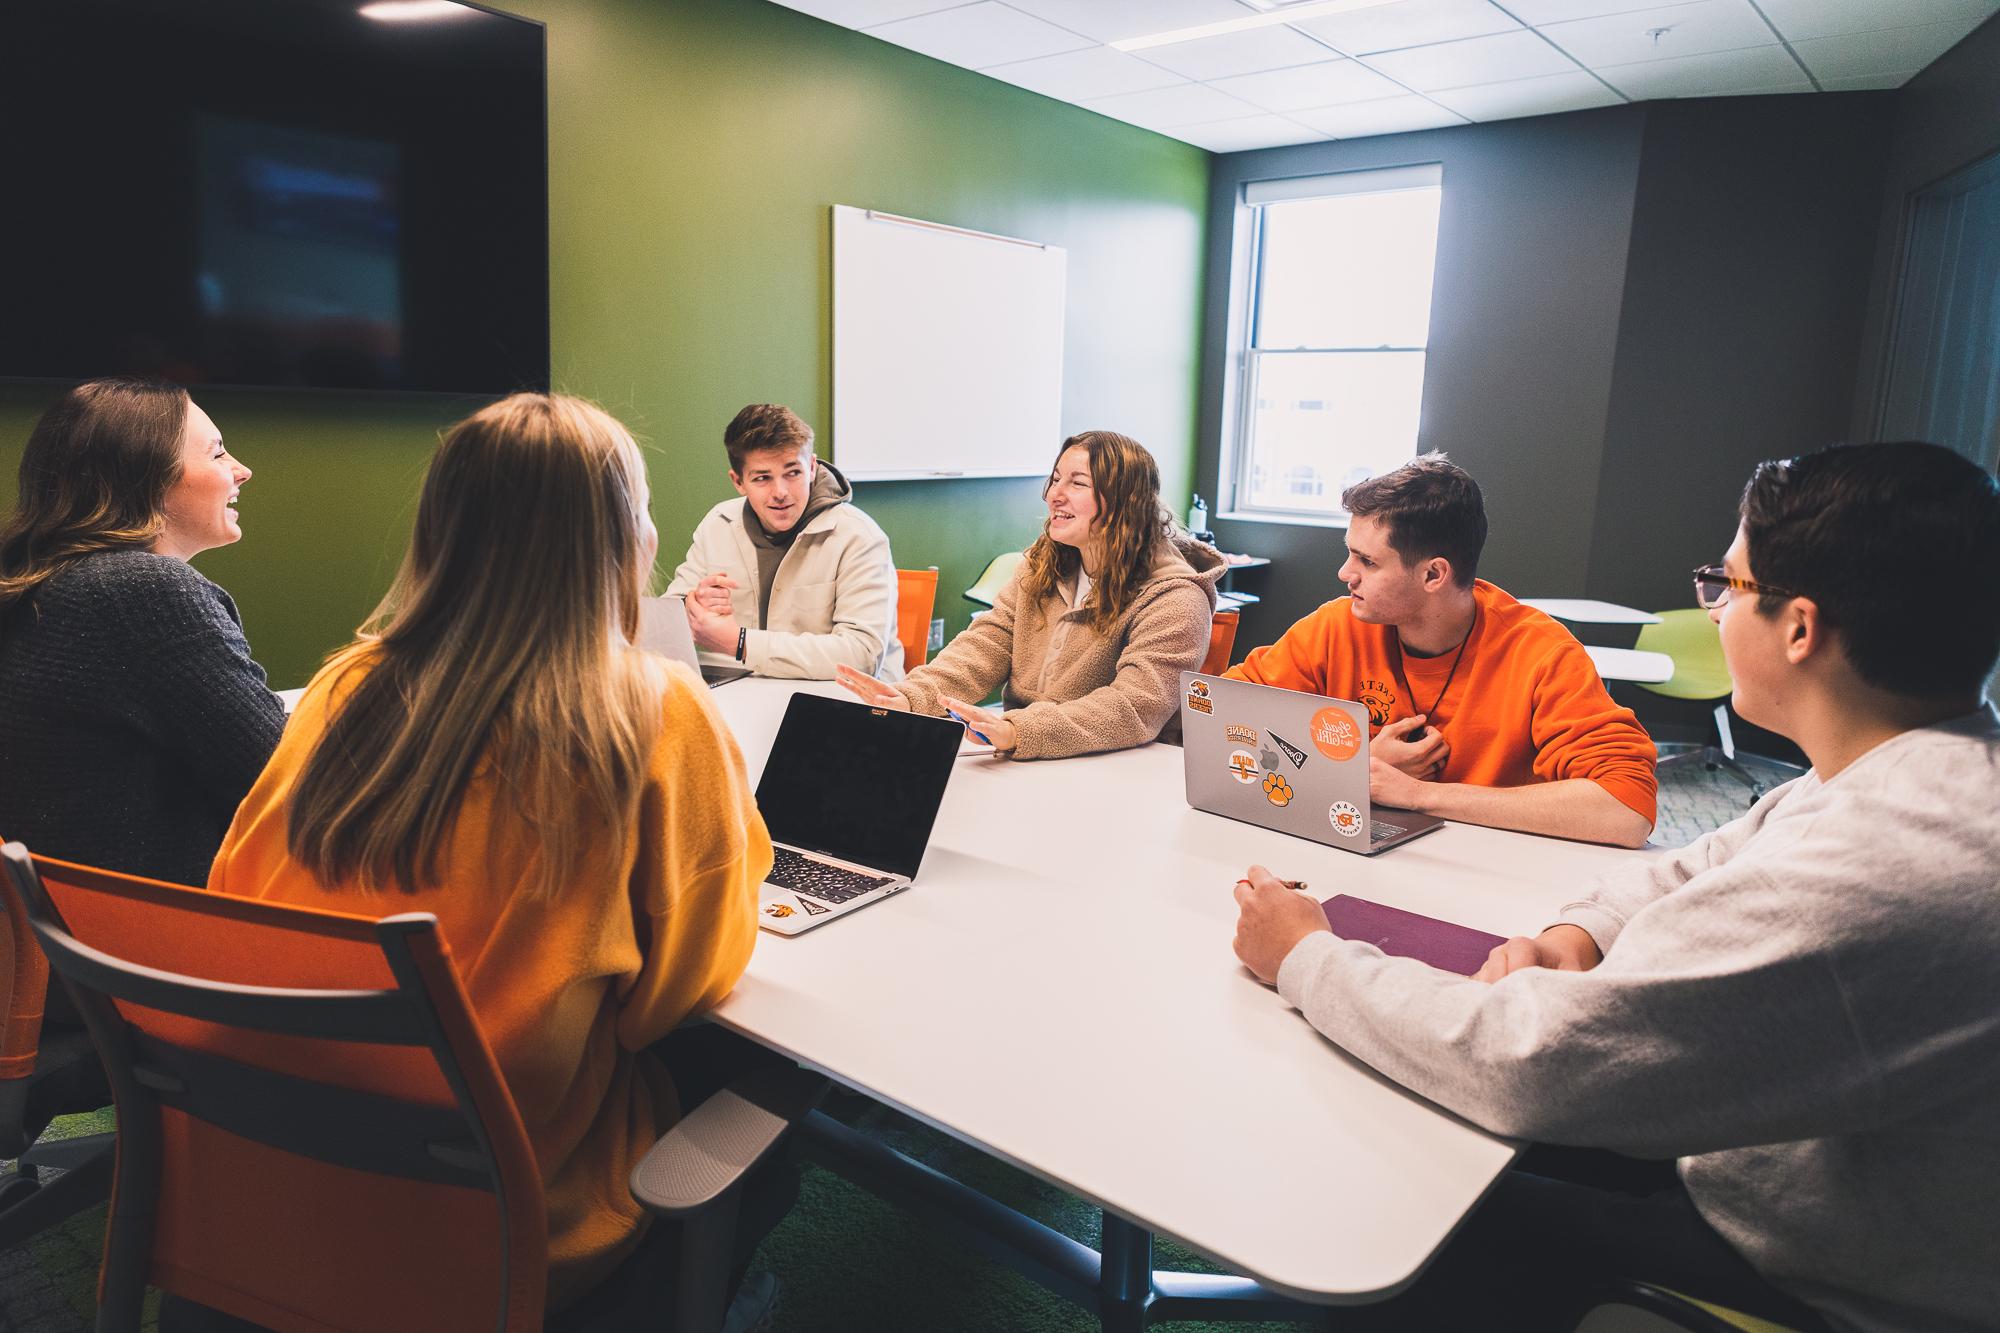 Six students sit around a white, rectangular table in a vibrant green-painted study room. Behind them are individual desks and chairs, and a window. 